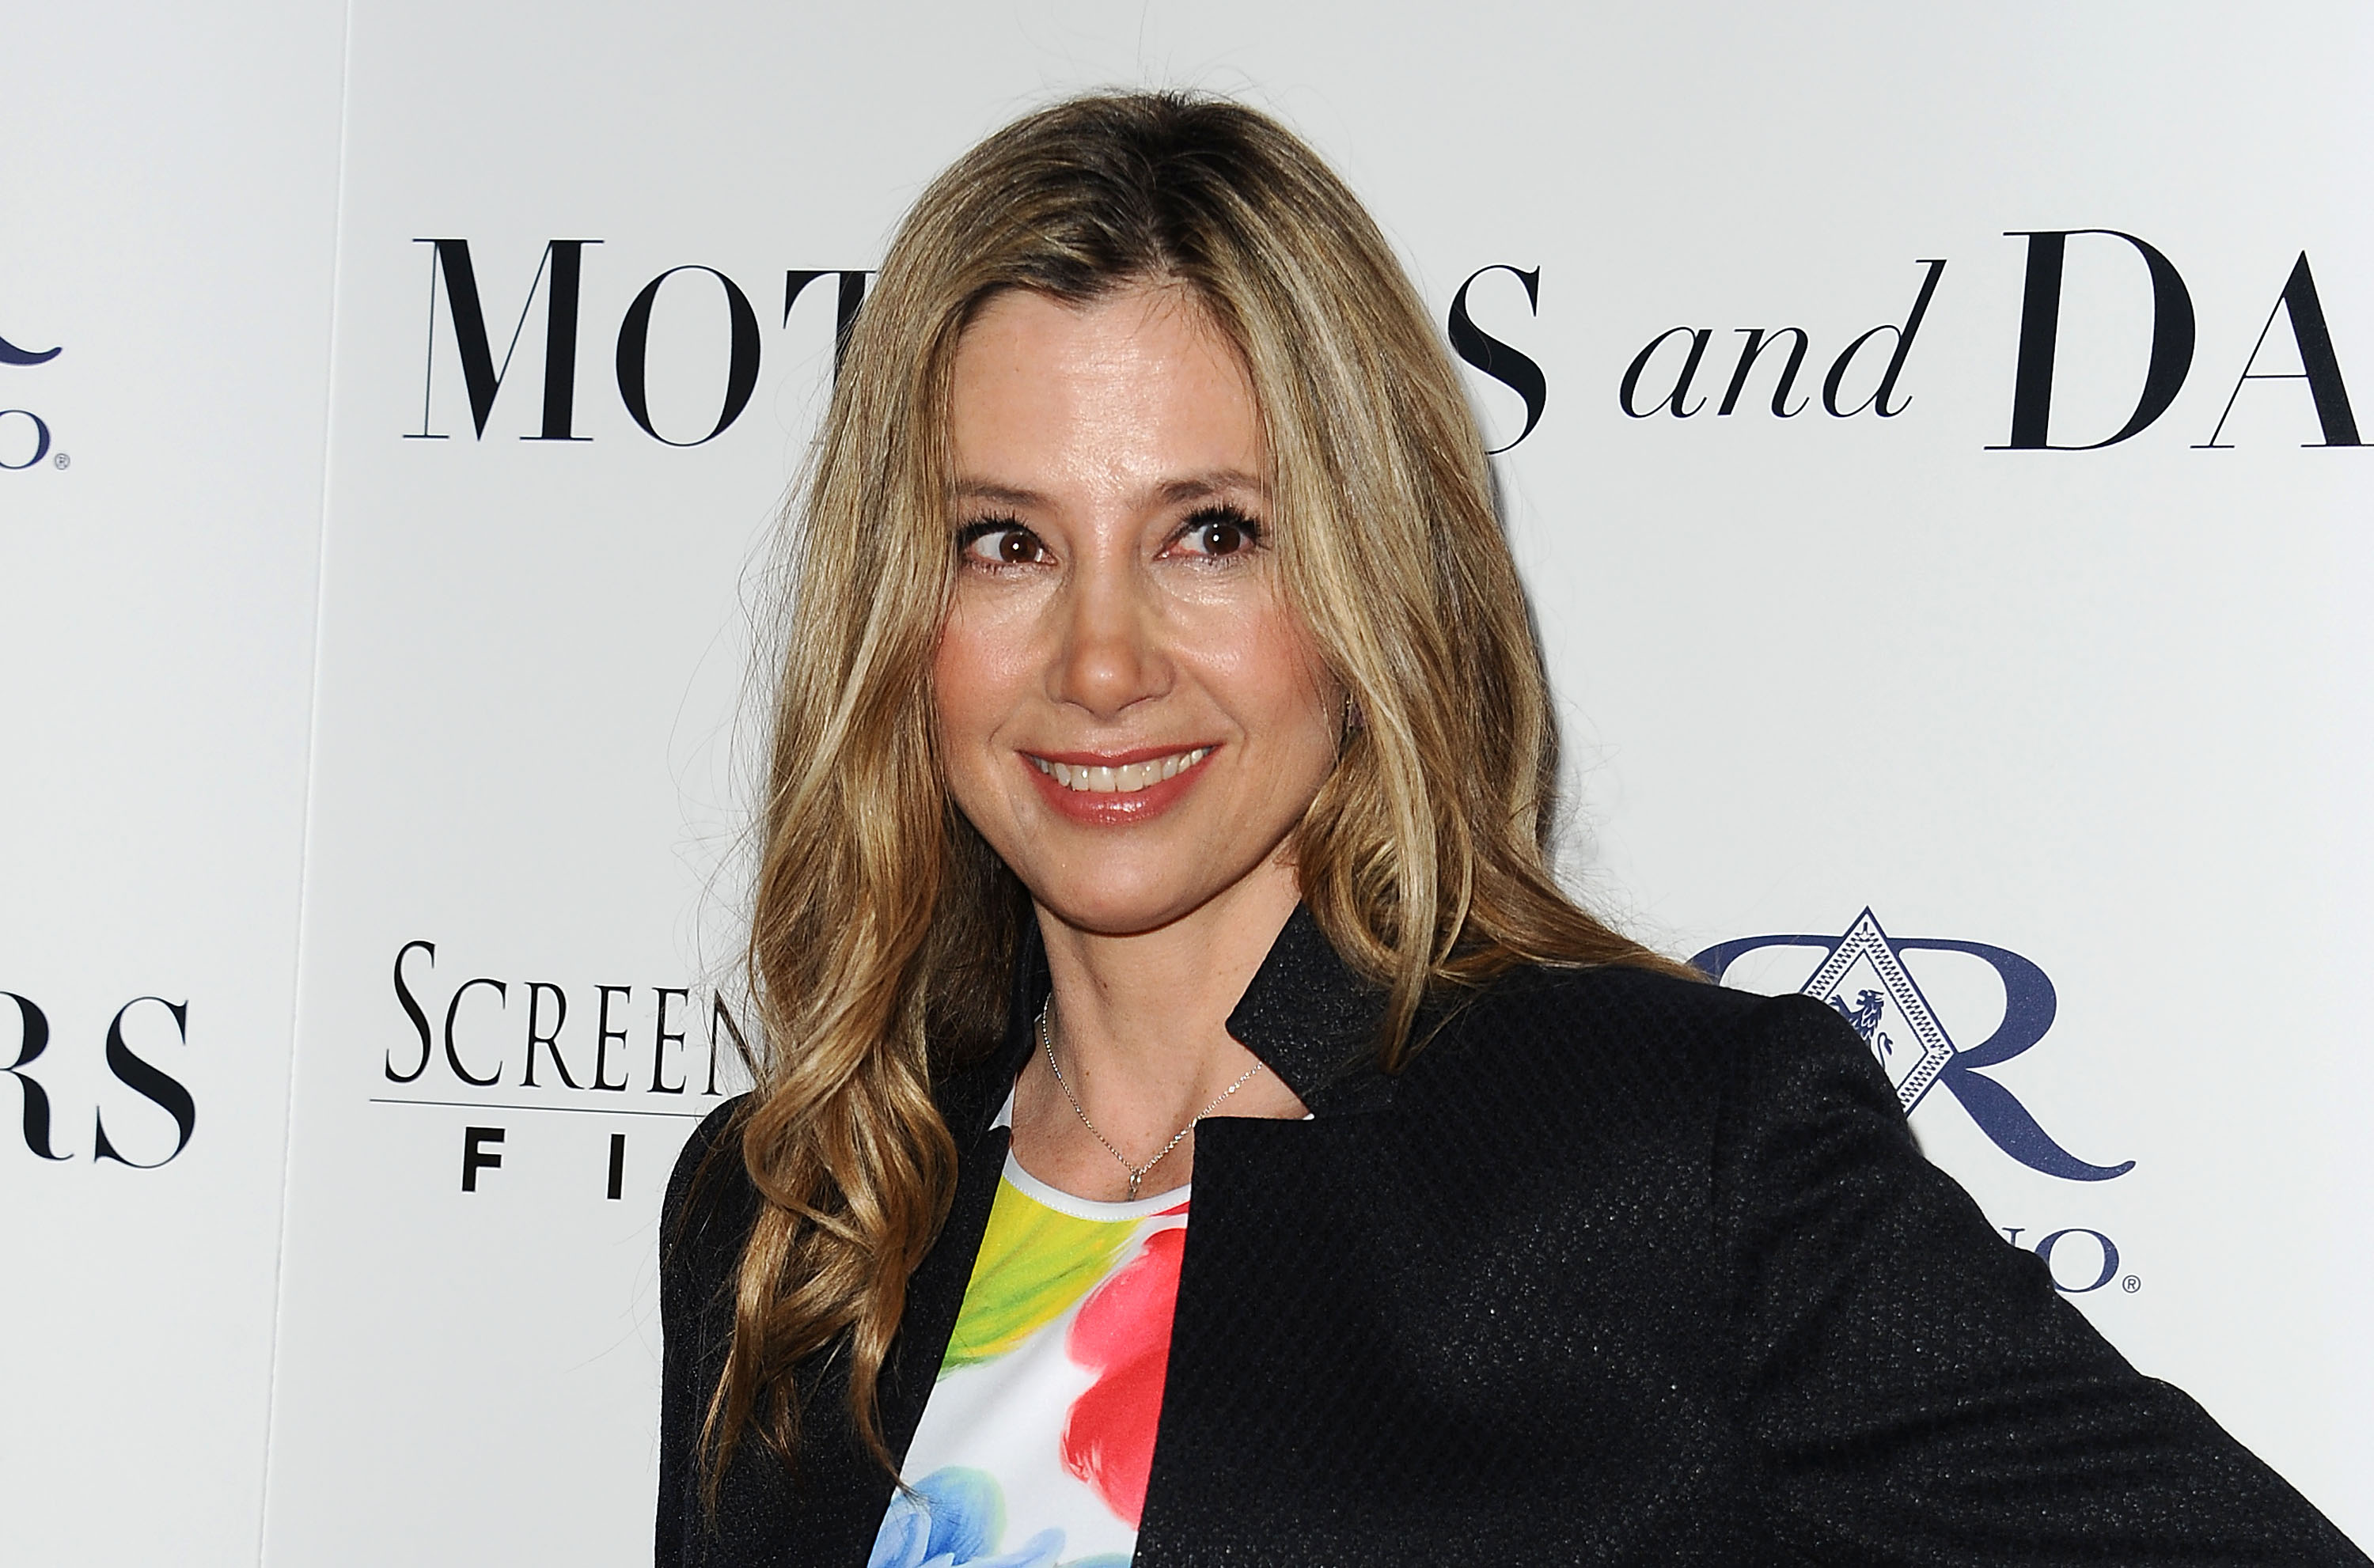 Actress Mira Sorvino attends the premiere of 